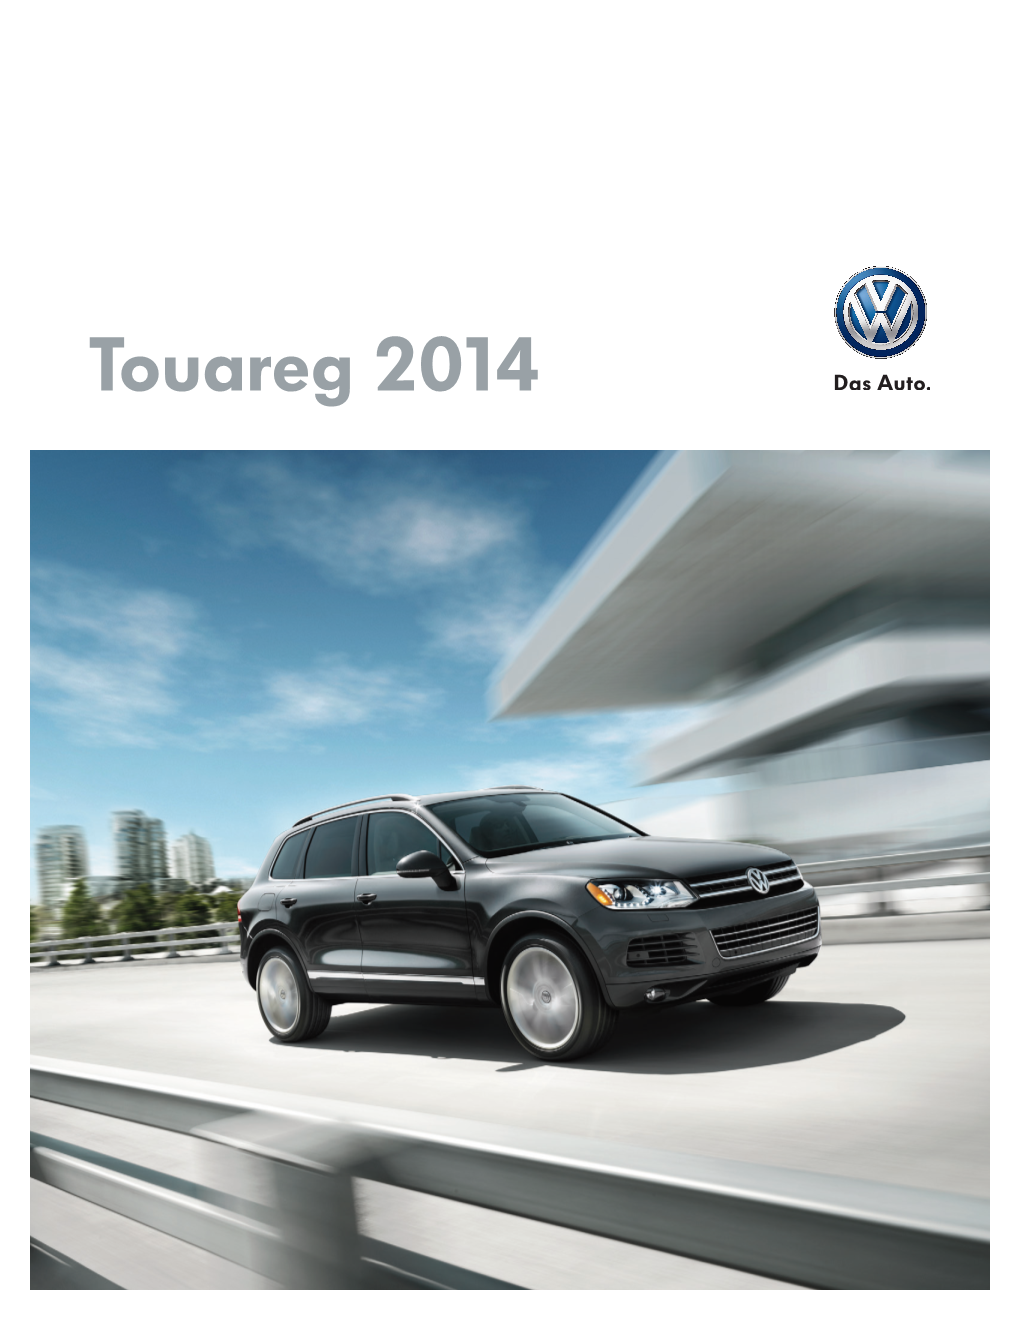 Touareg 2014 a Force to Be Reckoned With